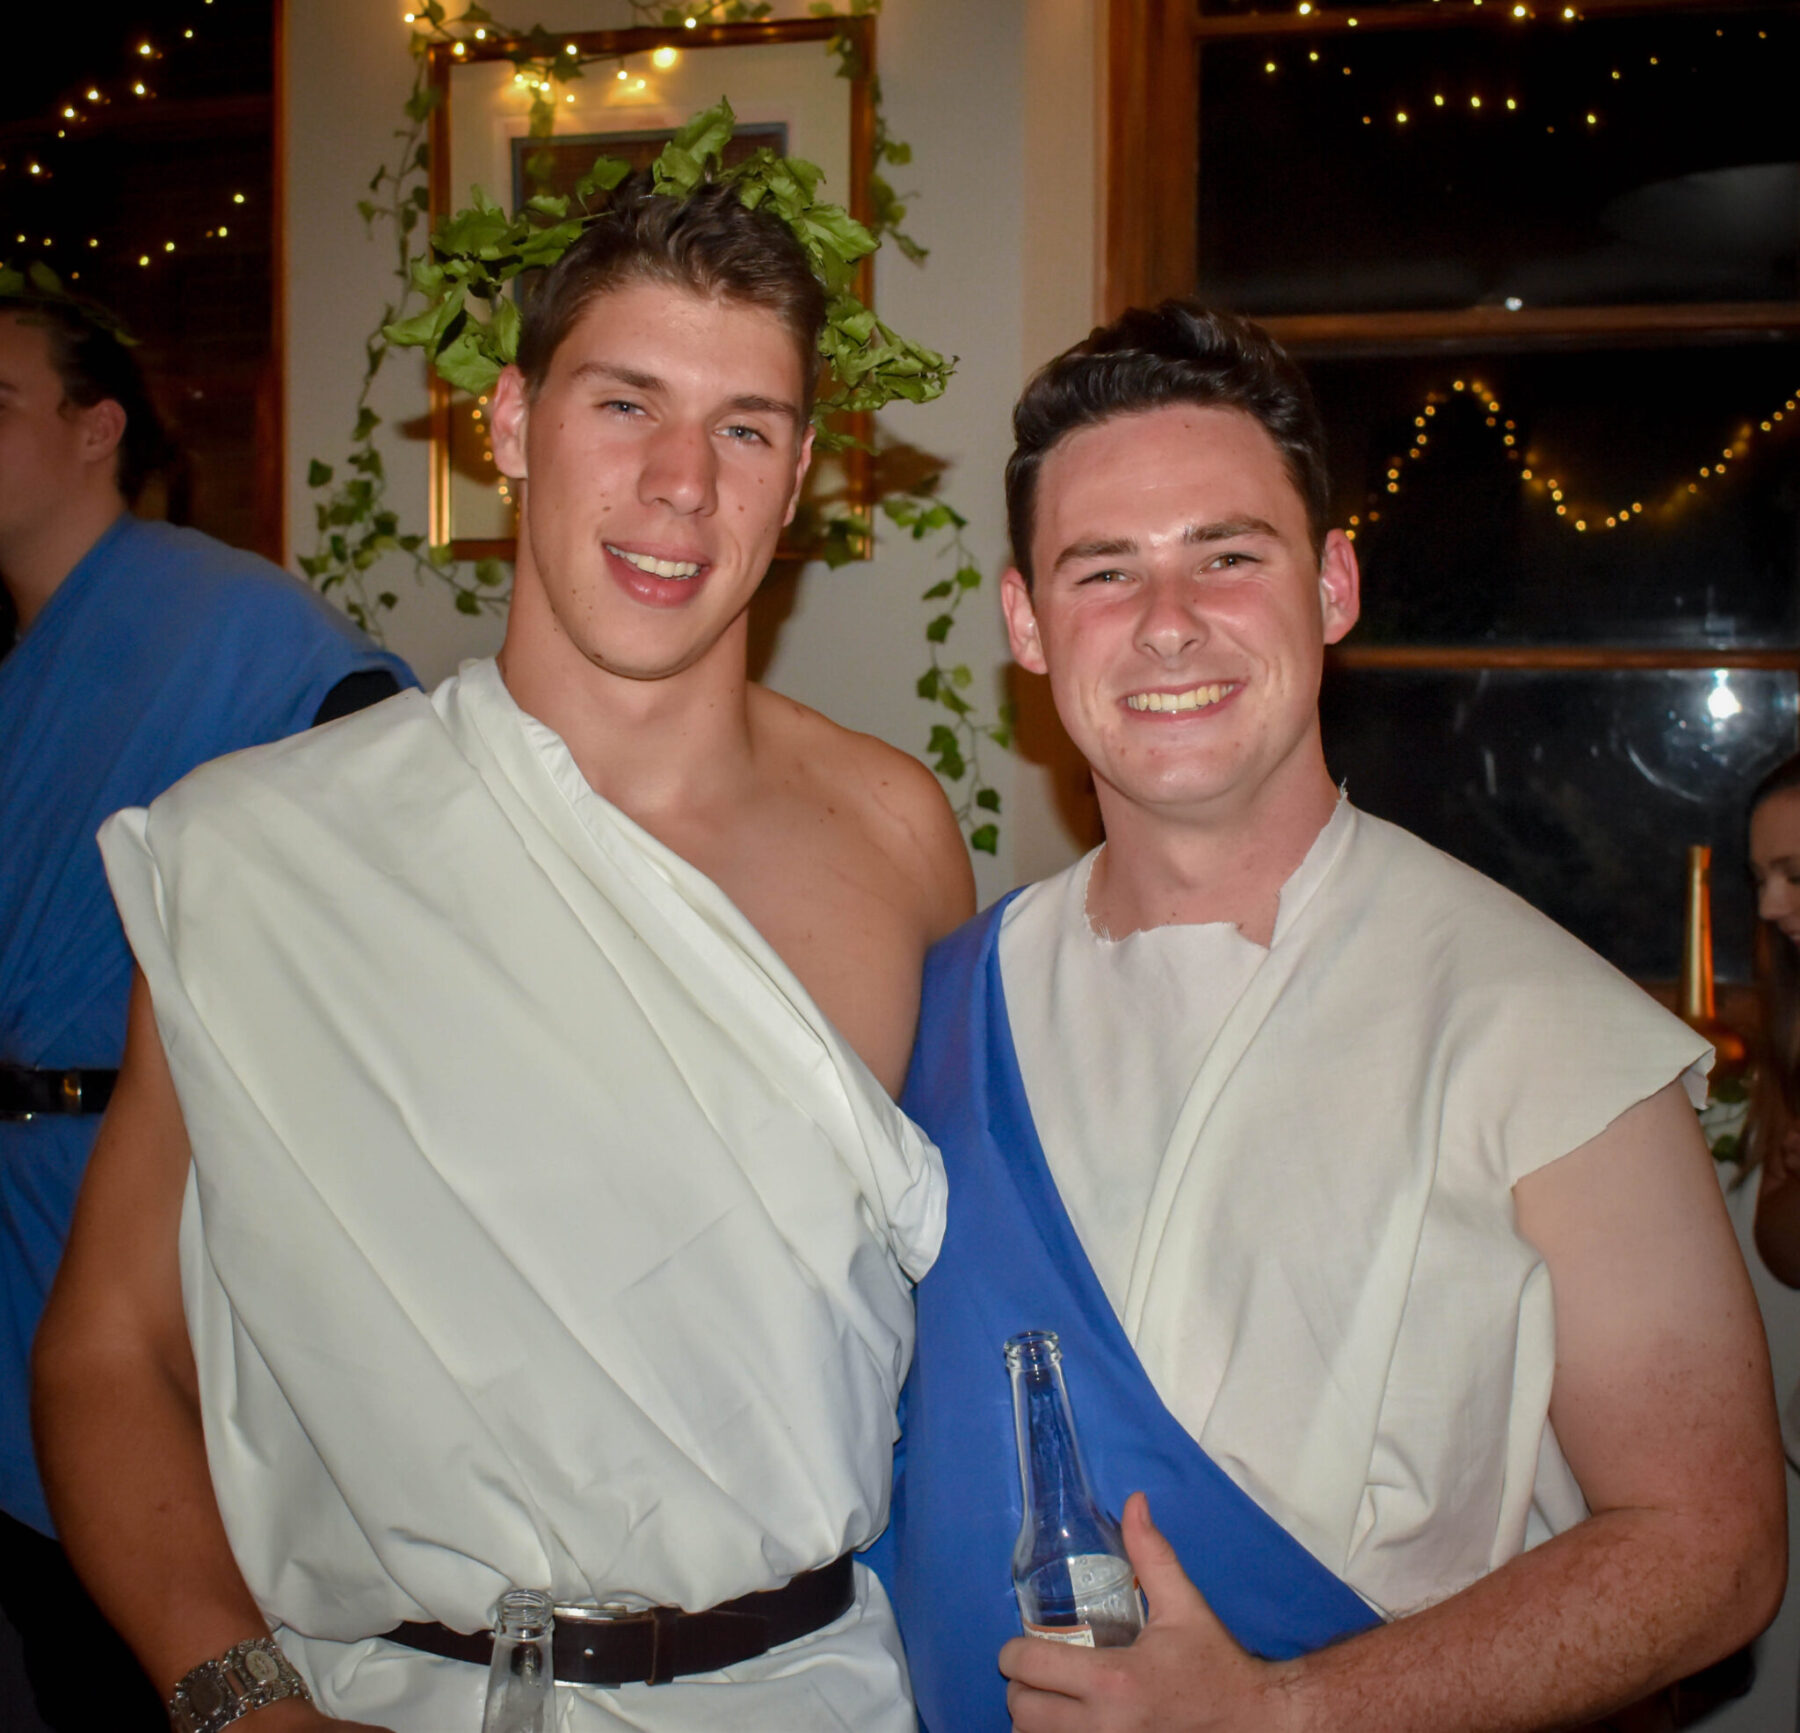 Classics-Week-Toga-Party-2021-Edited-3-scaled-1. Campion College Australia.